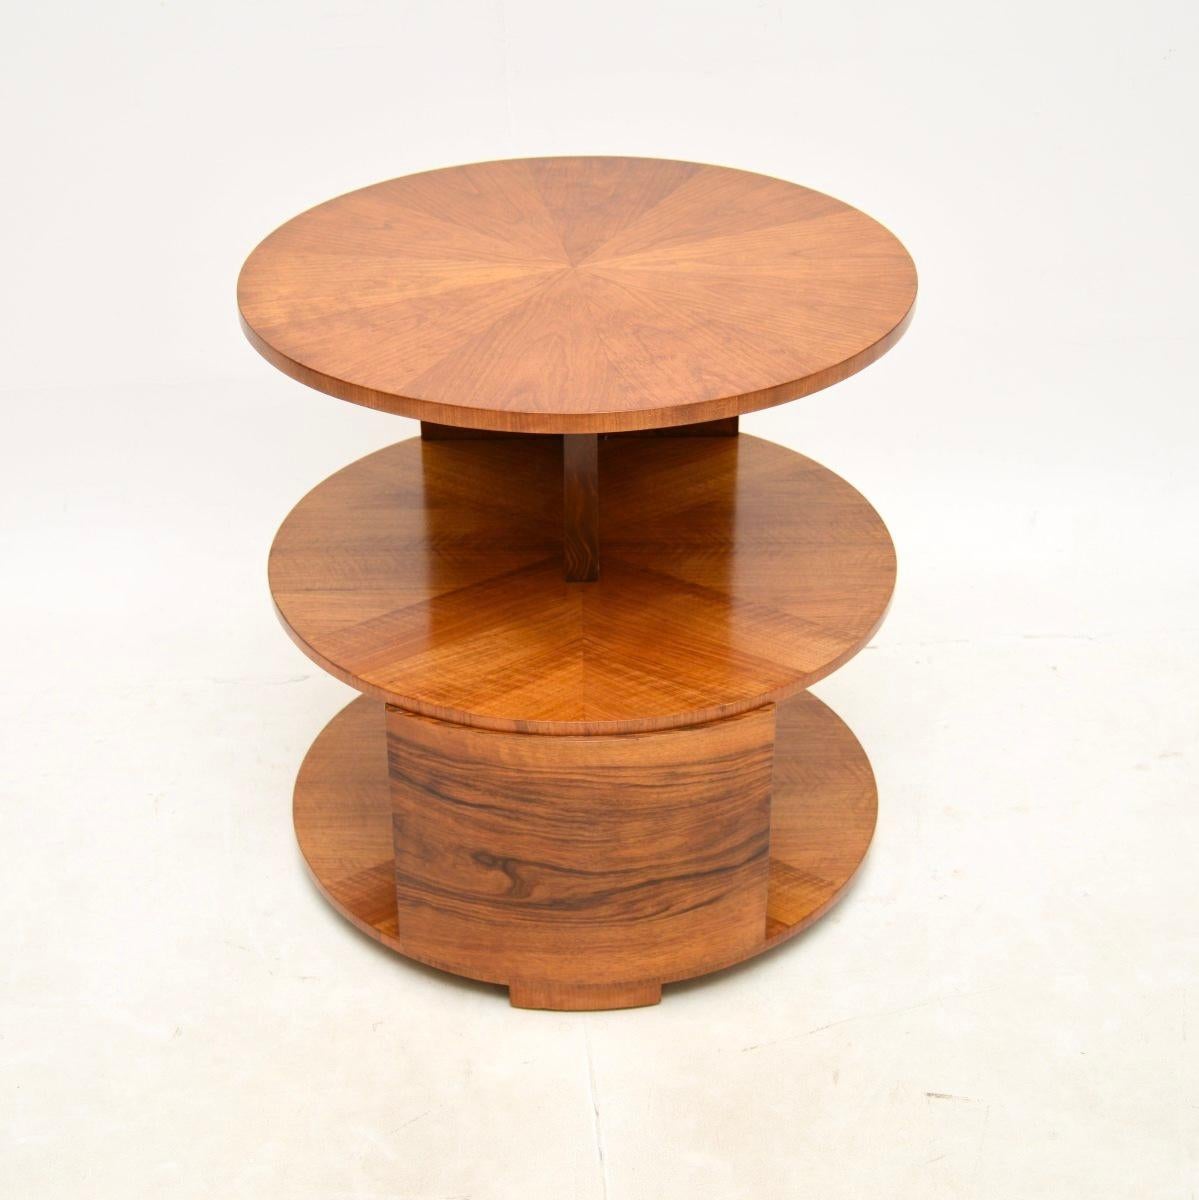 A fantastic original Art Deco walnut occasional side / centre table. This was made in England, it dates from the 1920’s.

It has a beautiful stepped design, with the three circular tiers overhanging each other giving an S shaped profile. The quality